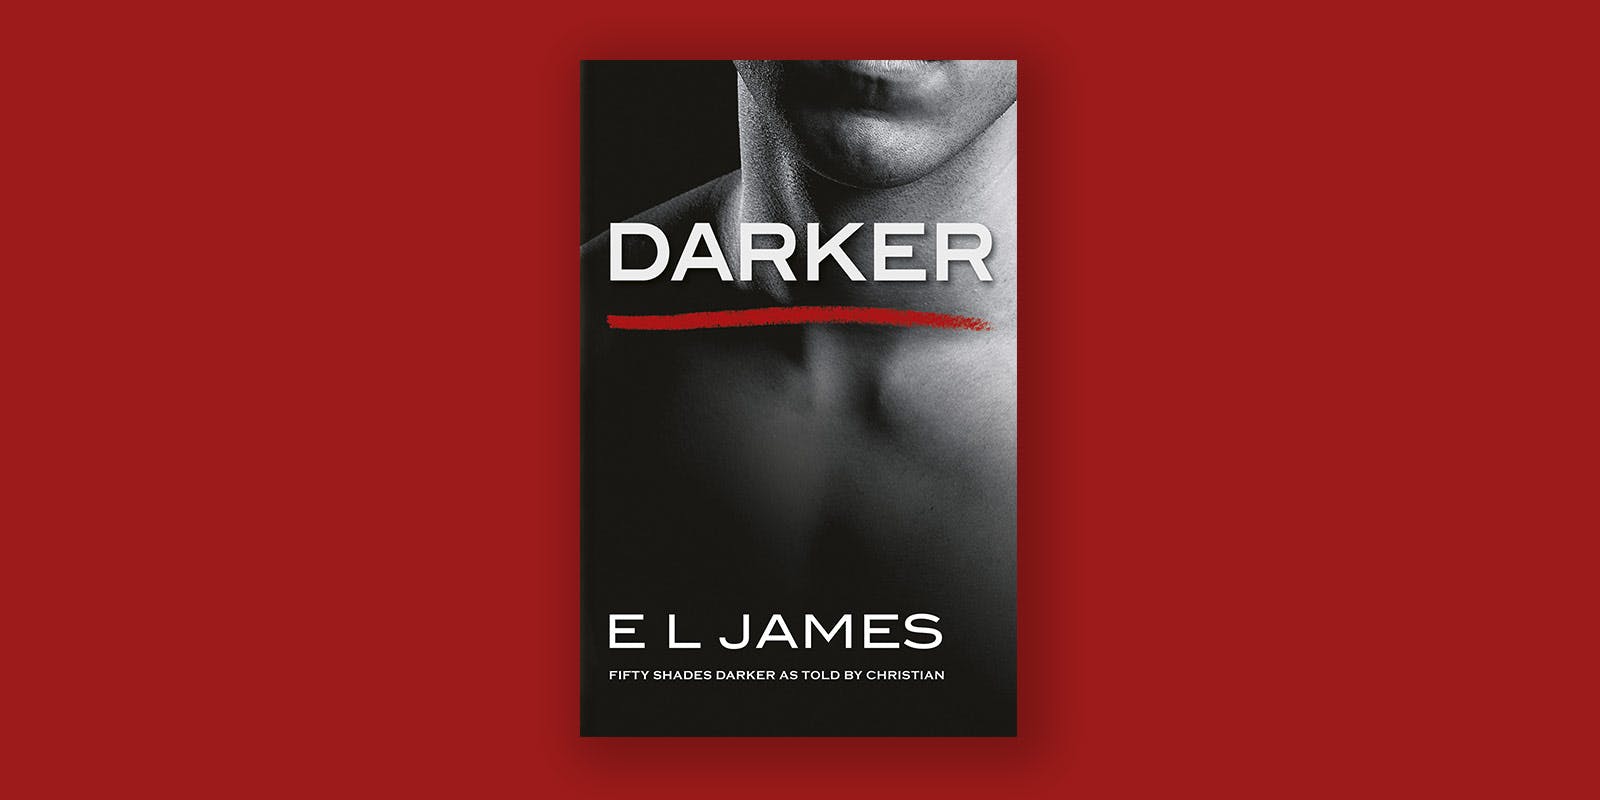 New from E L James